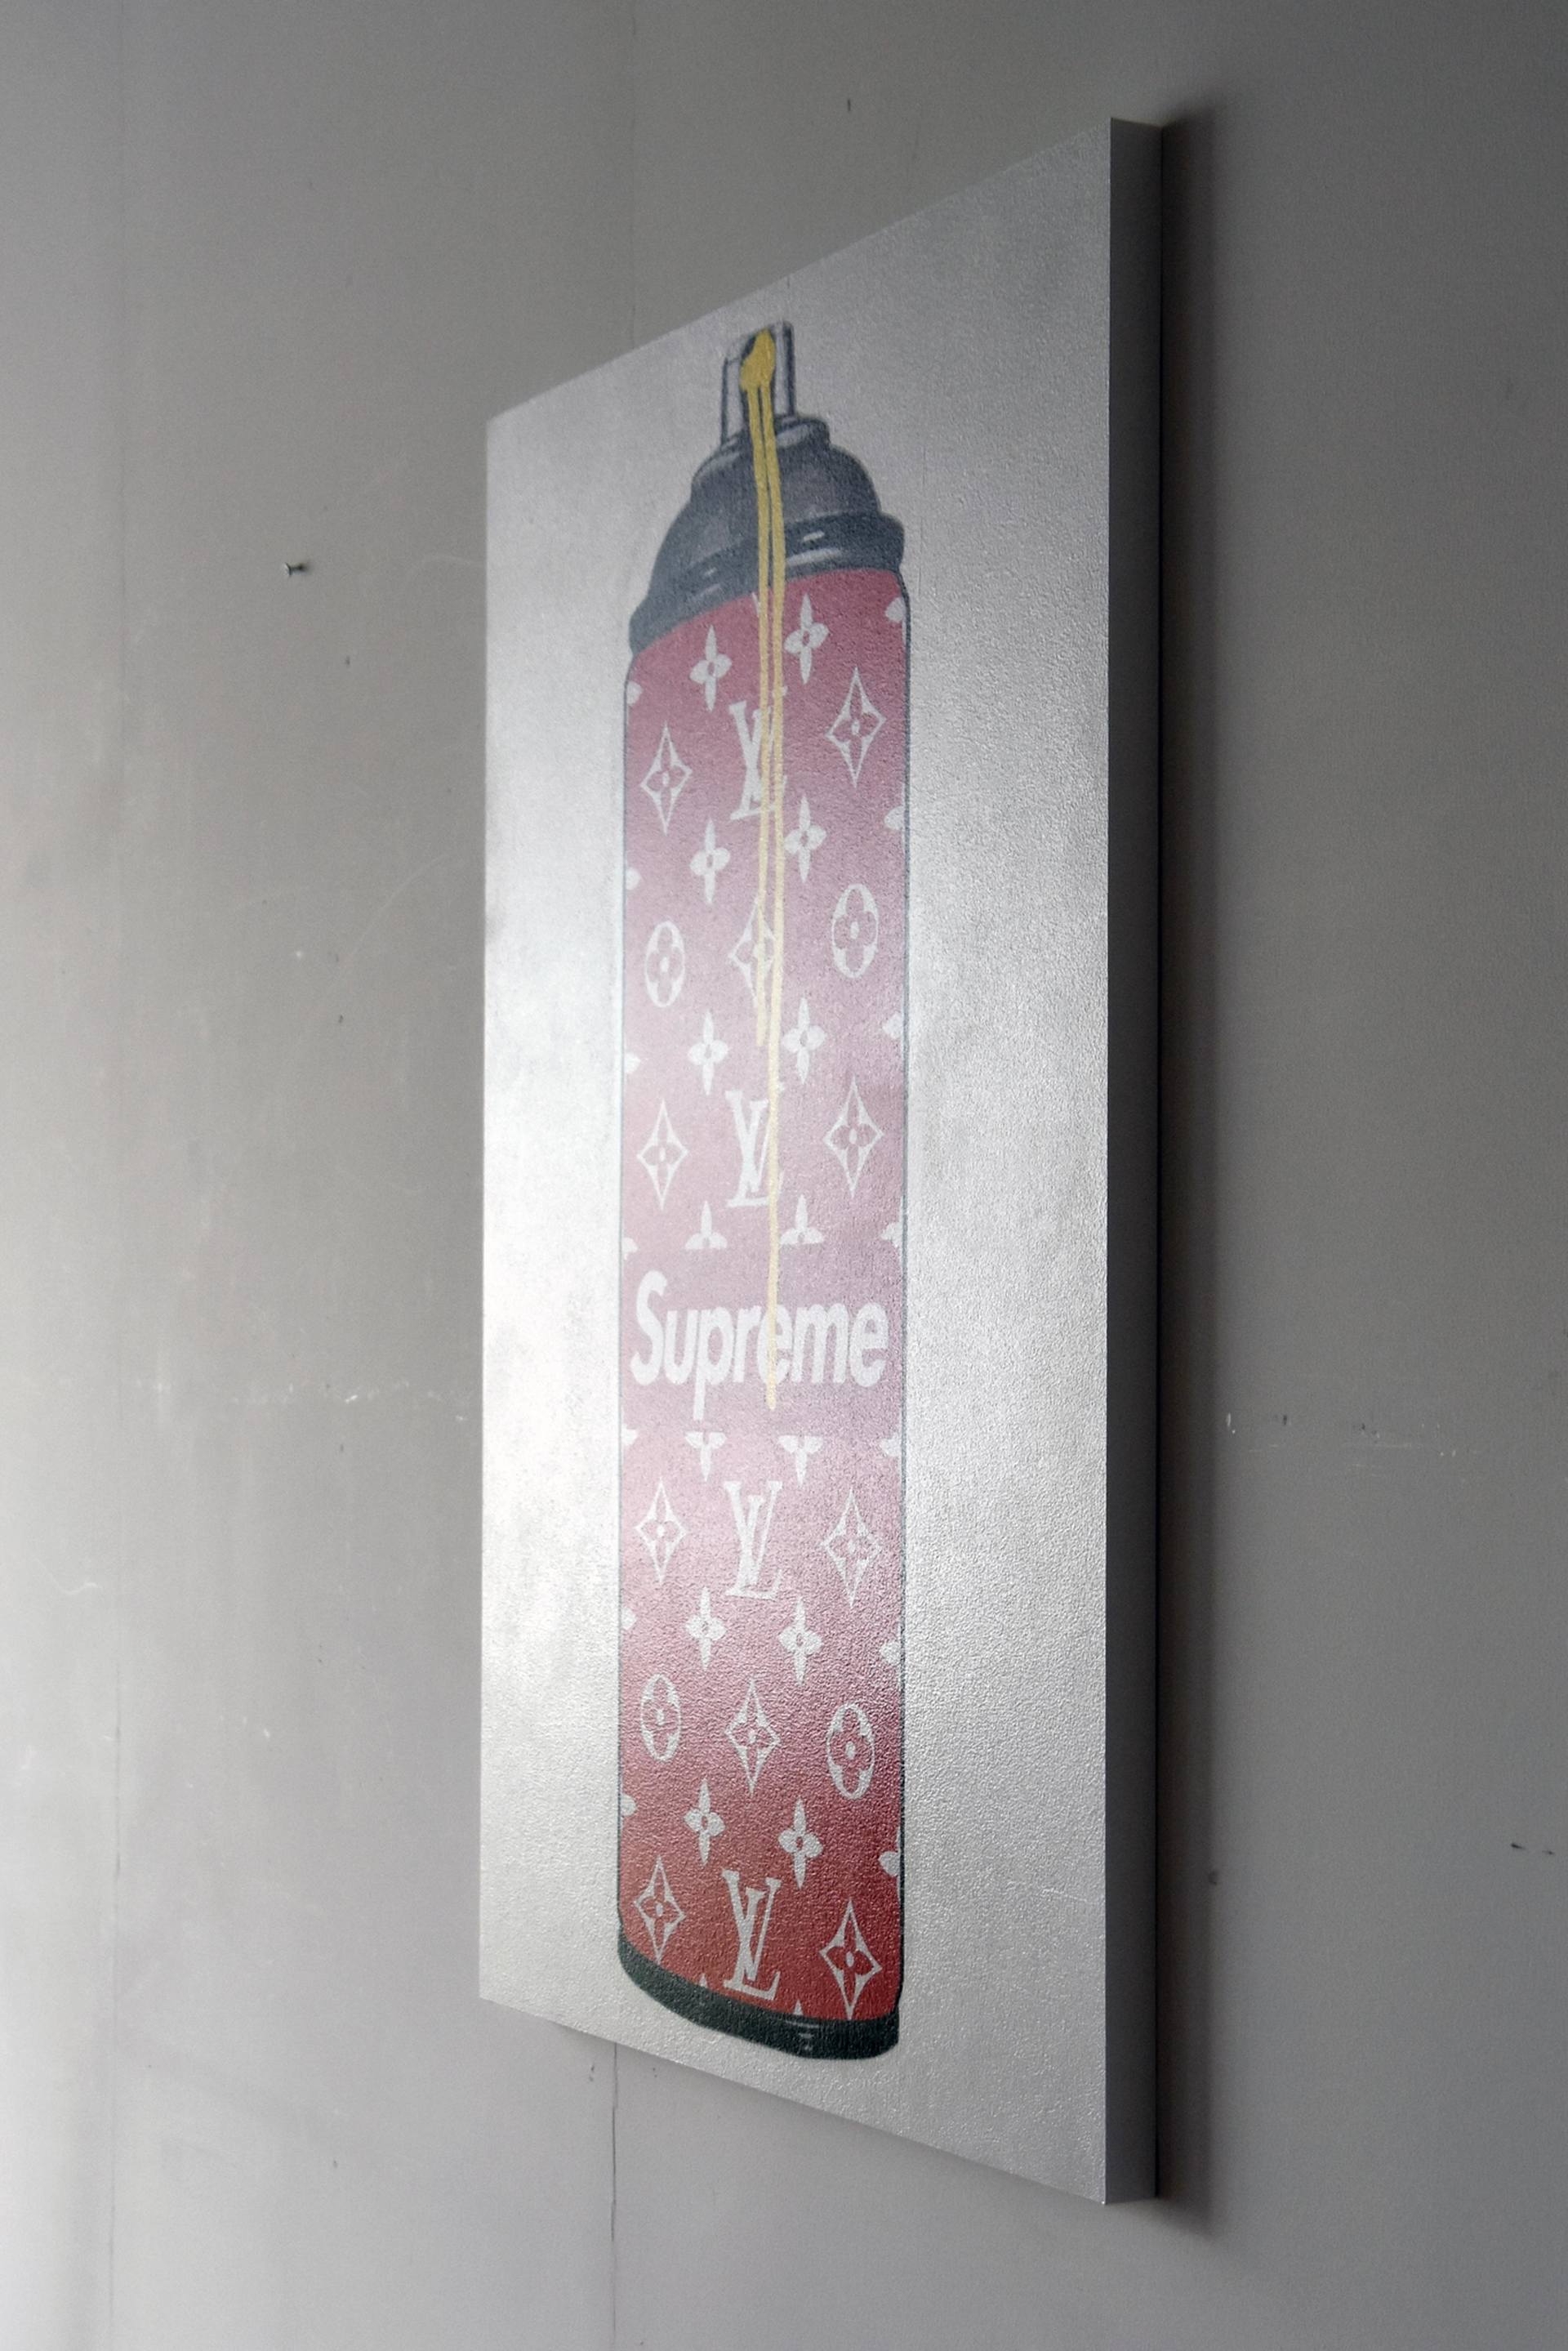 LV Supreme - OG (Yellow Drip) Painting by Campbell La Pun